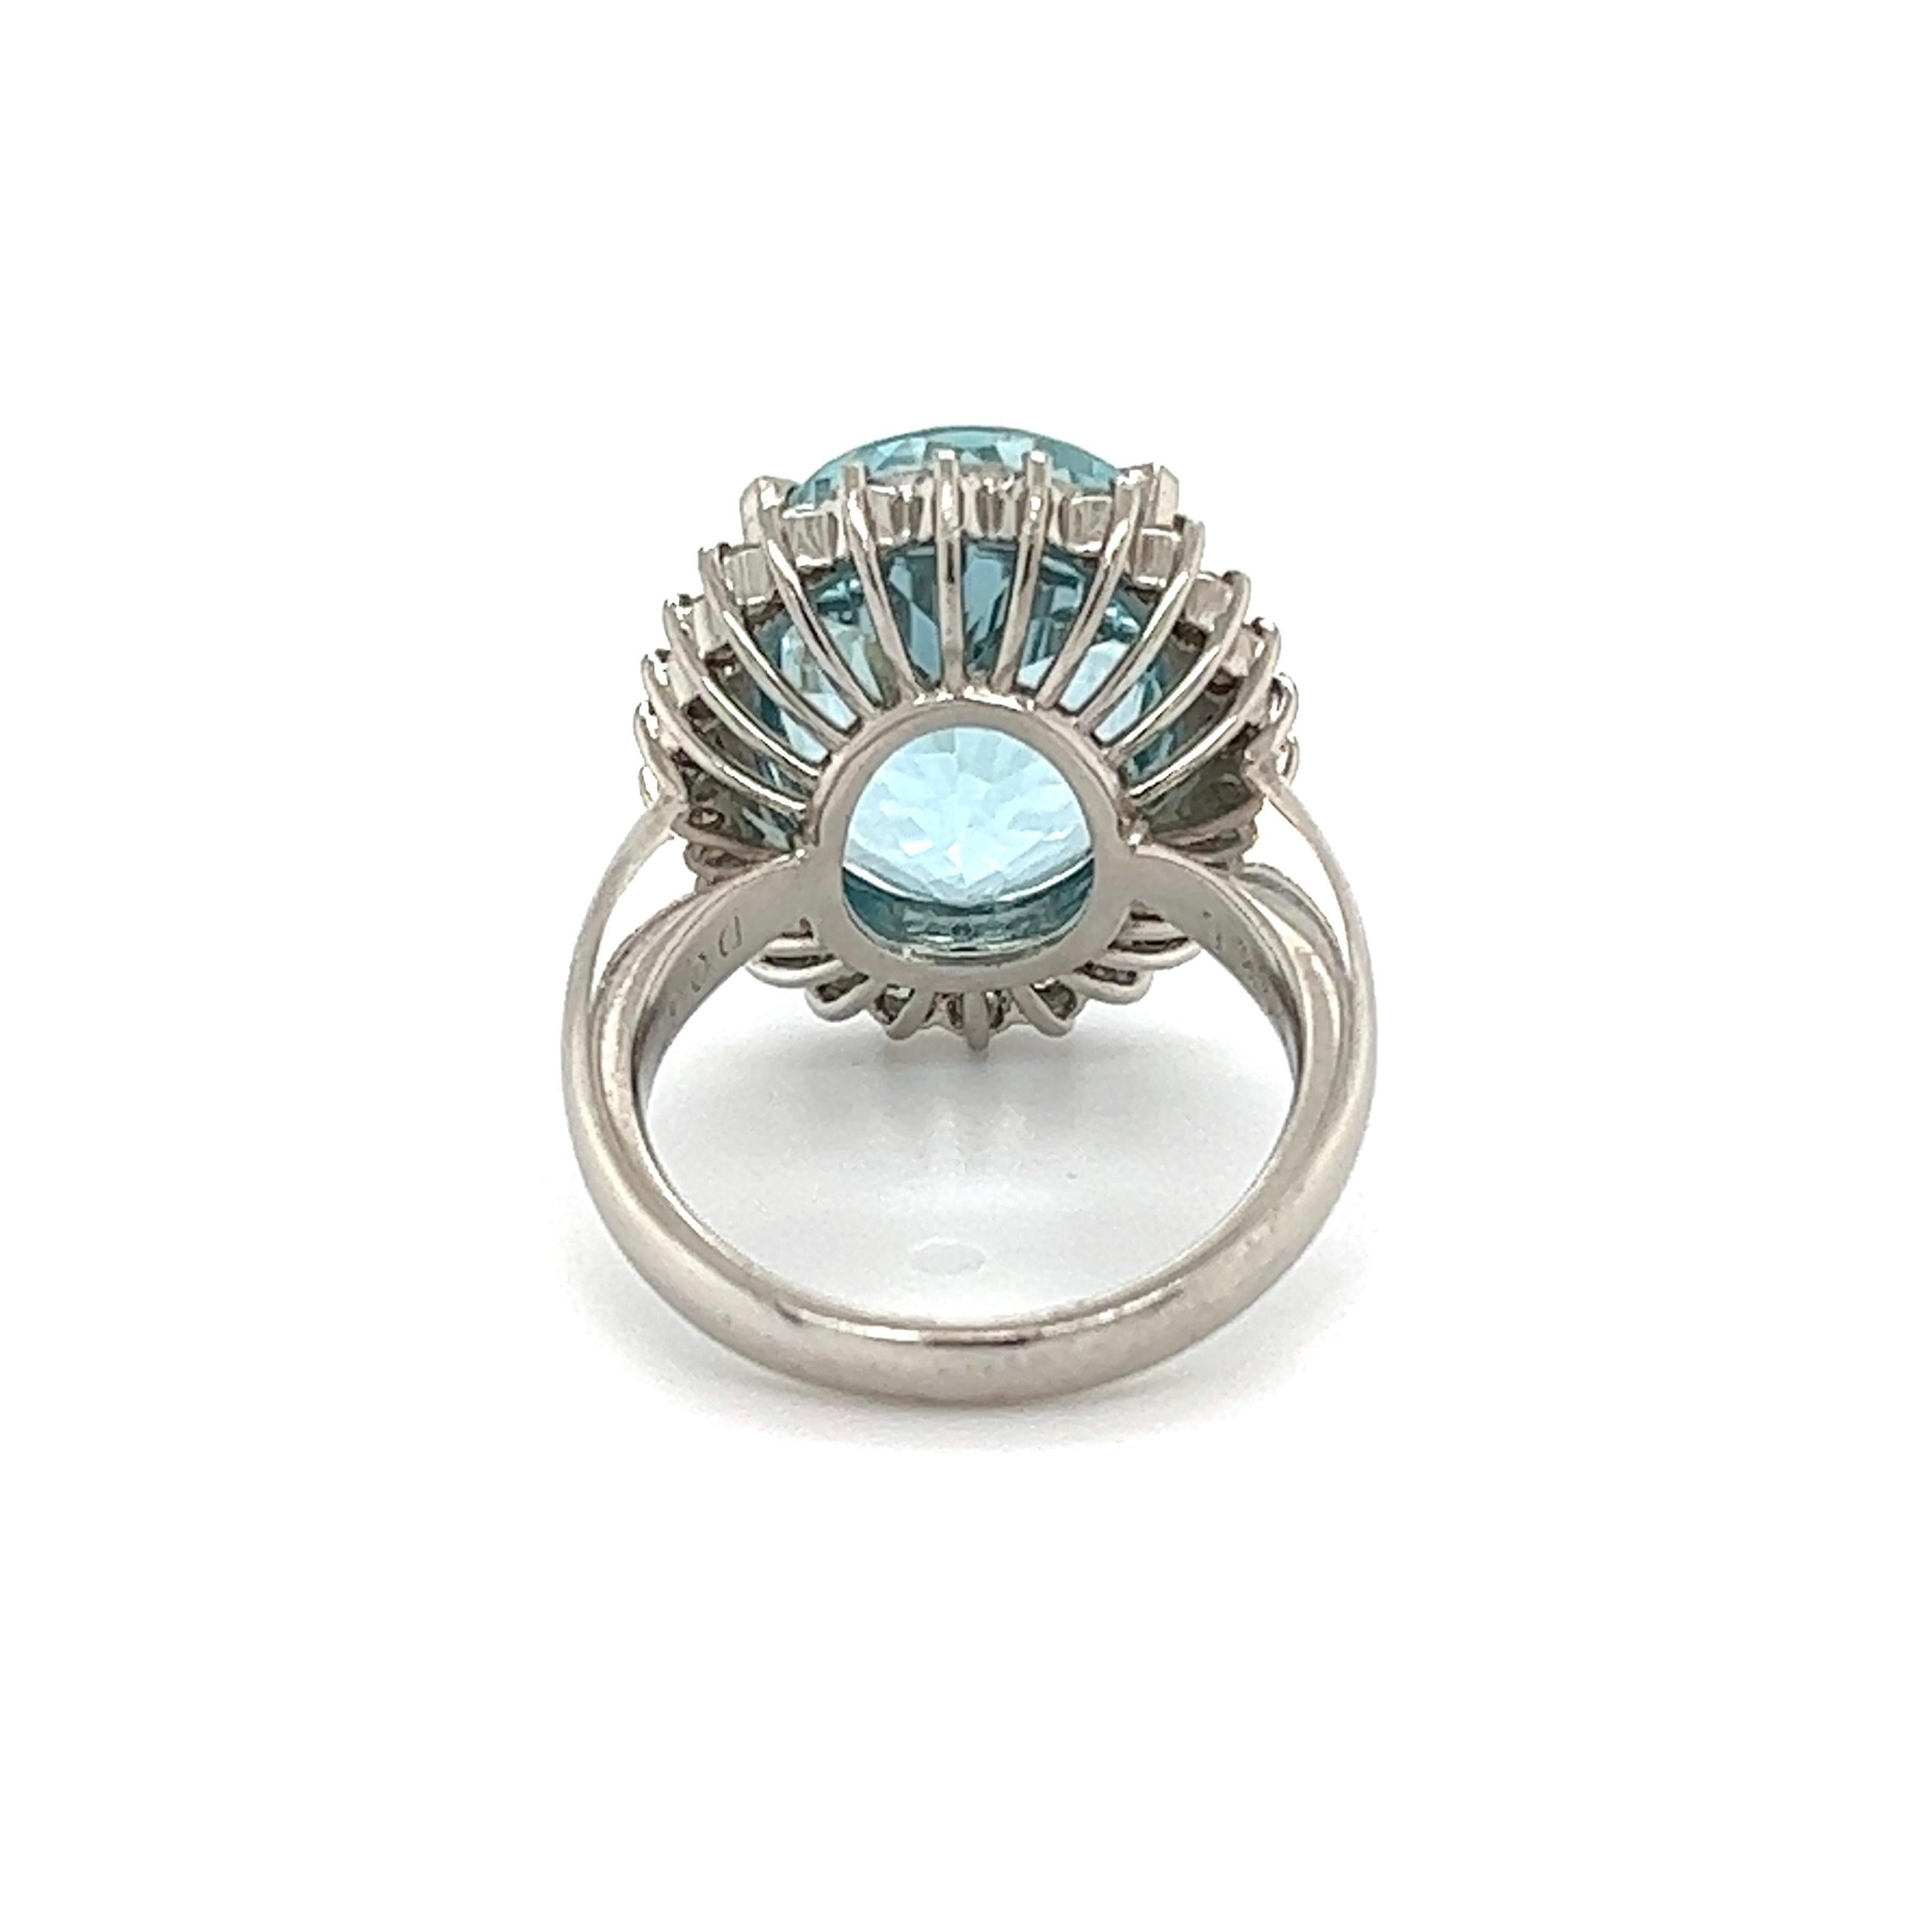 9.25 Carat Oval Aquamarine and Diamond Platinum Ring Estate Fine Jewelry In Excellent Condition For Sale In Montreal, QC